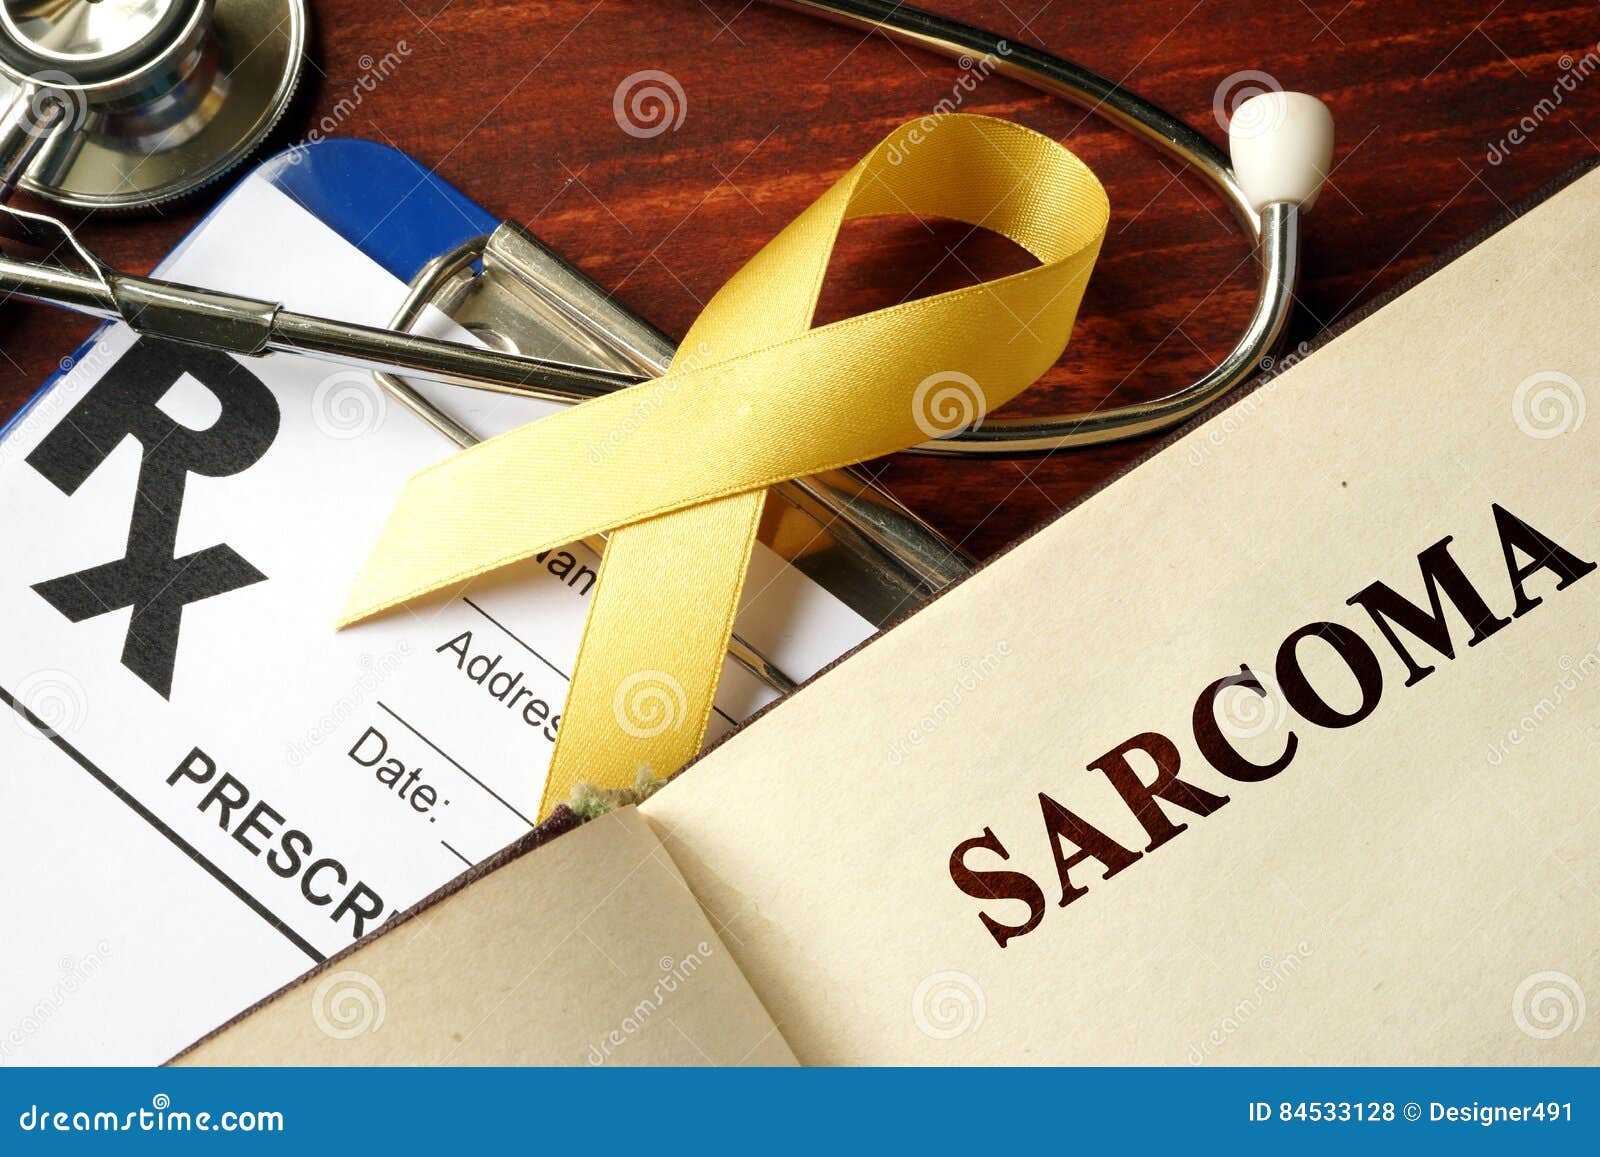 sarcoma written on a page